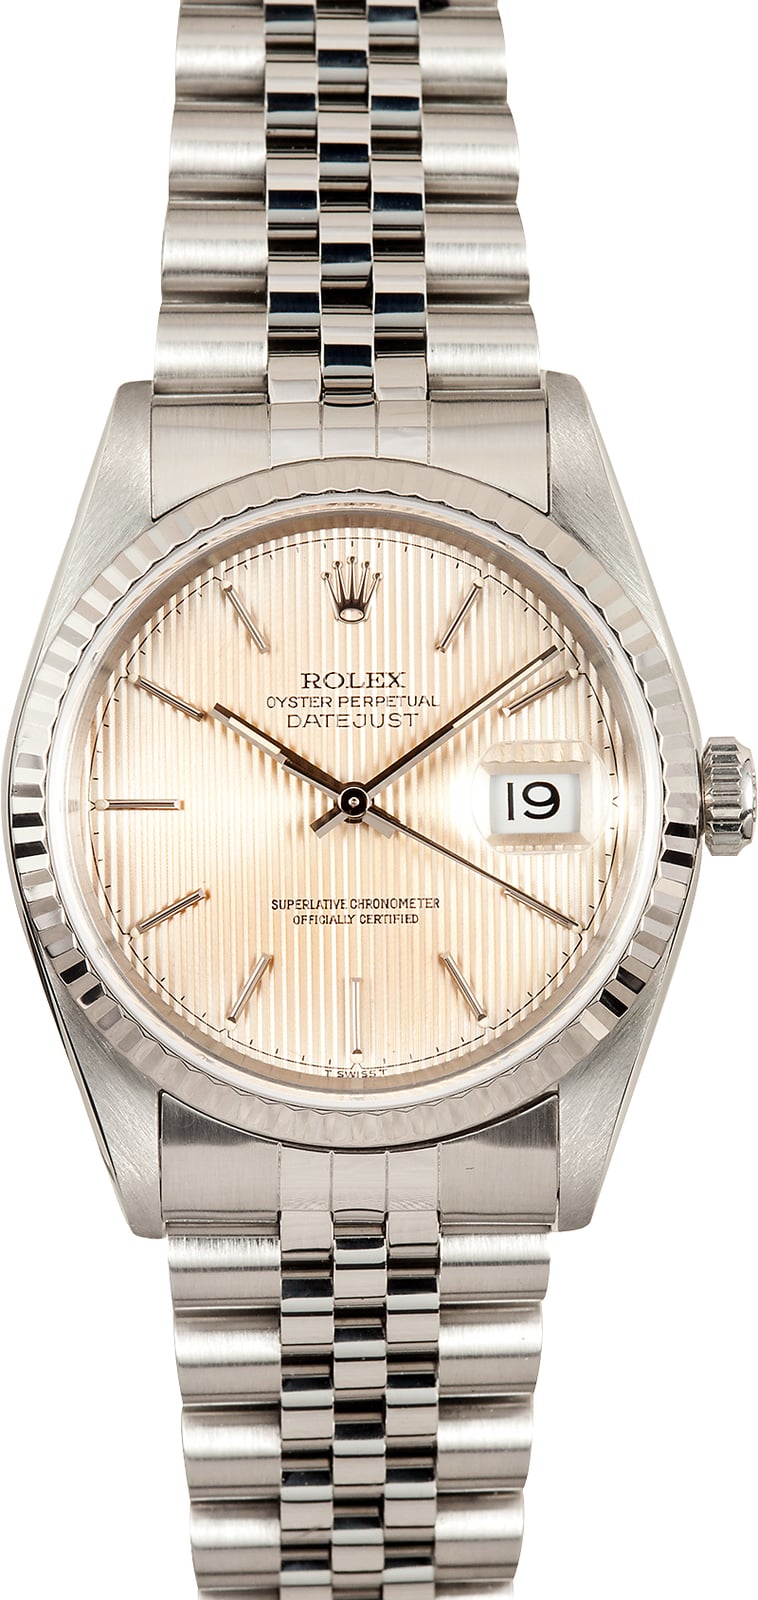 Rolex Oyster Perpetual DateJust Steel 16234